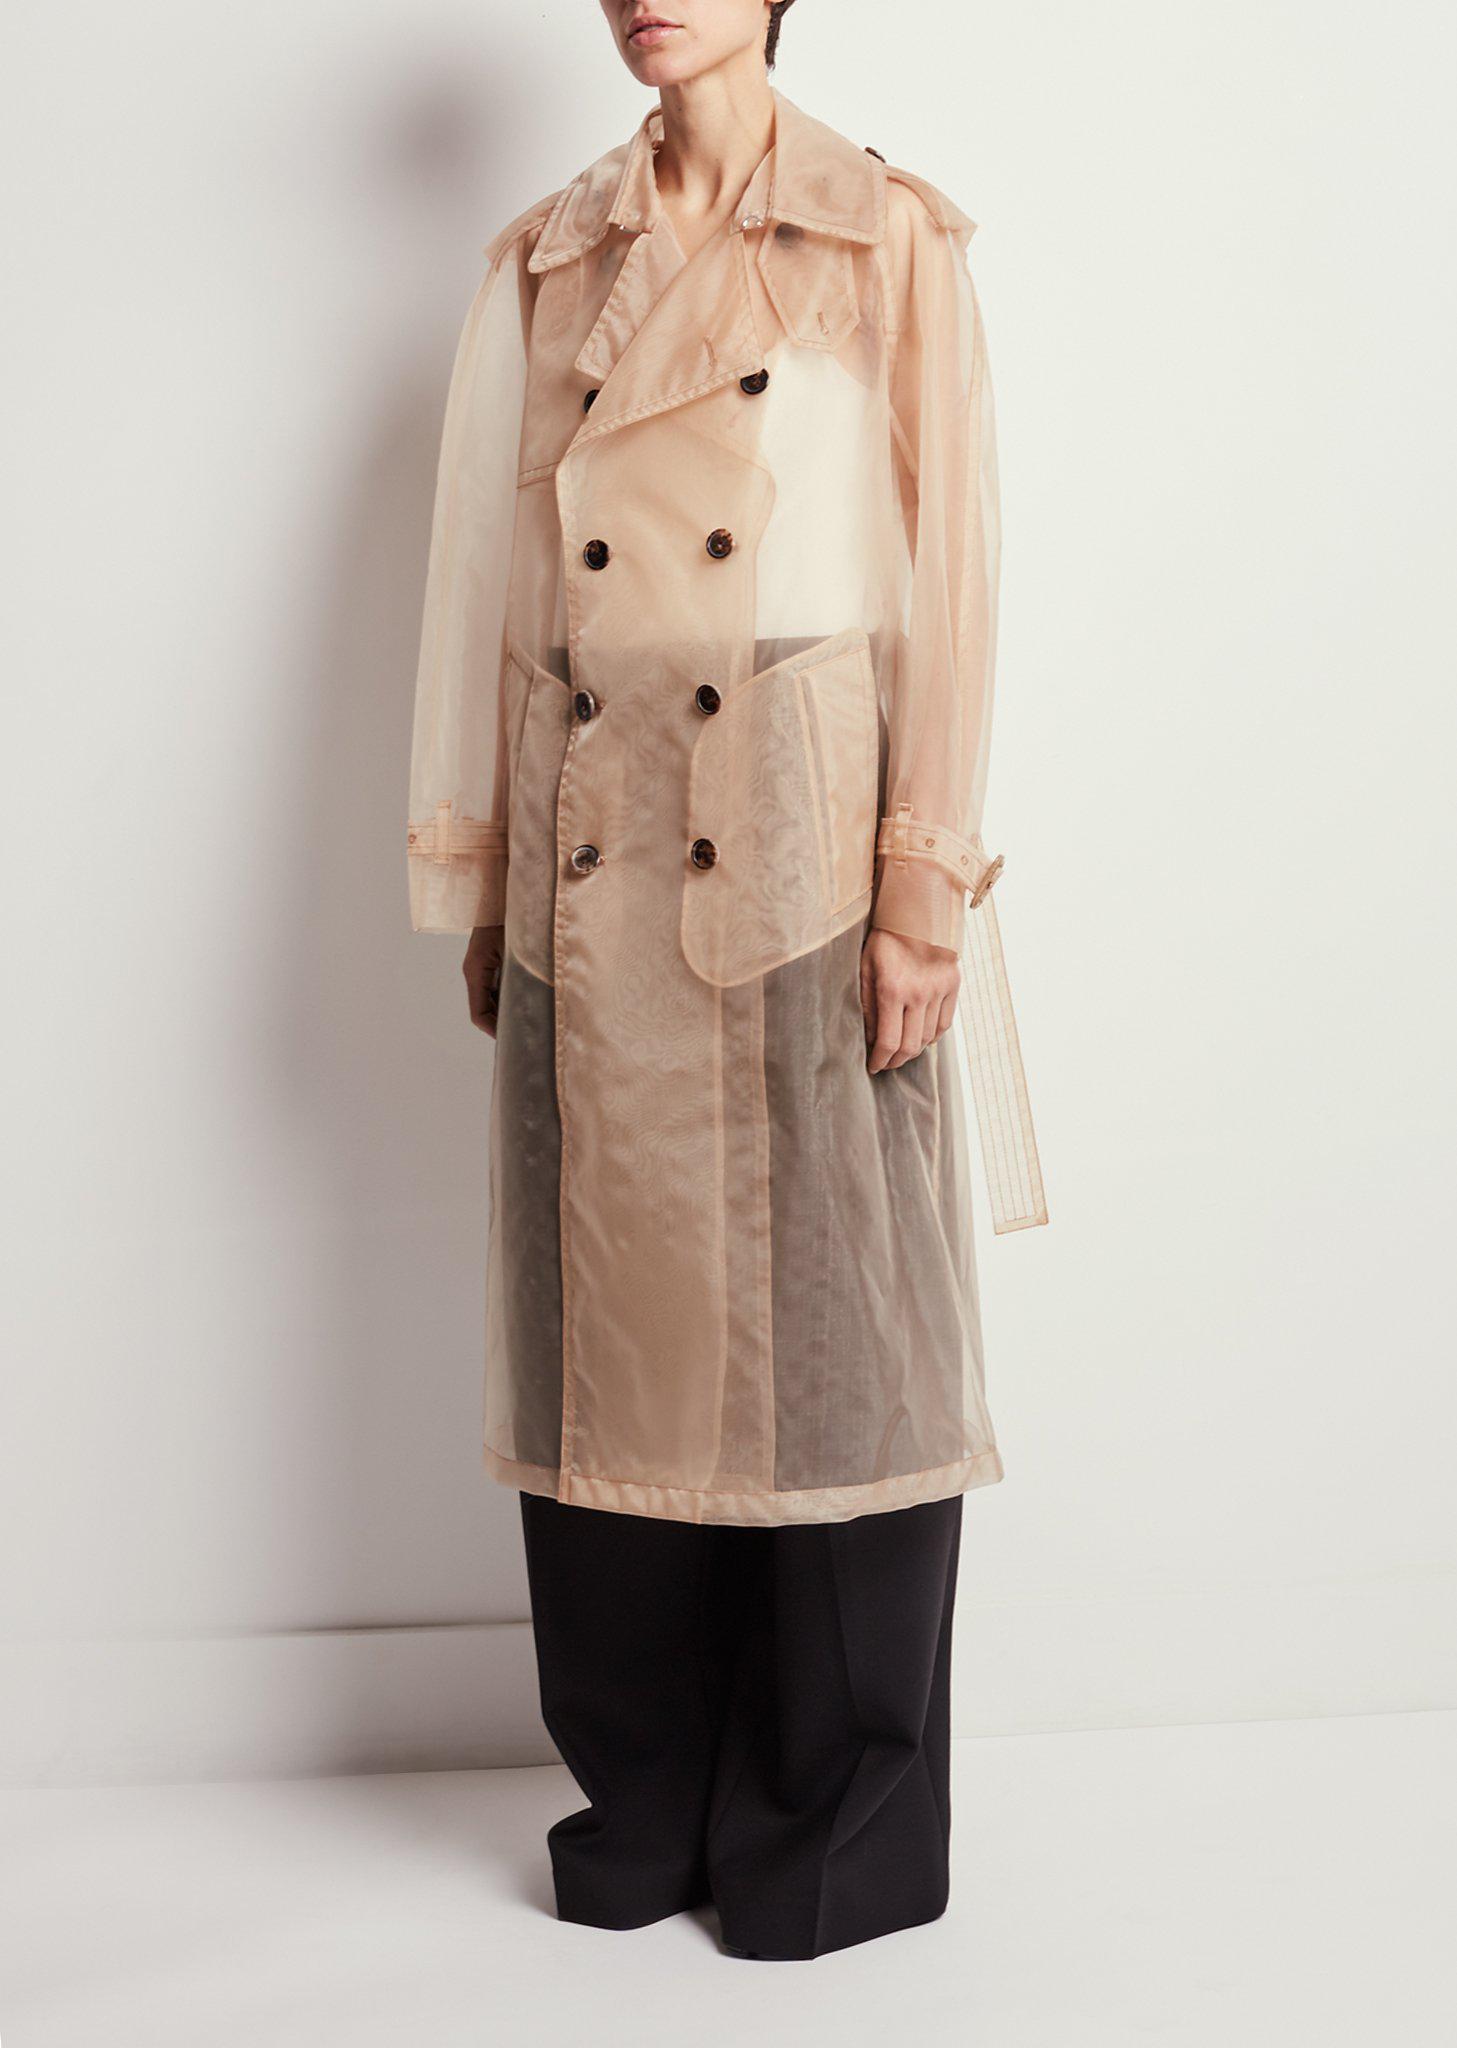 Maison Margiela Organza Trench Coat in Natural | Lyst Canada